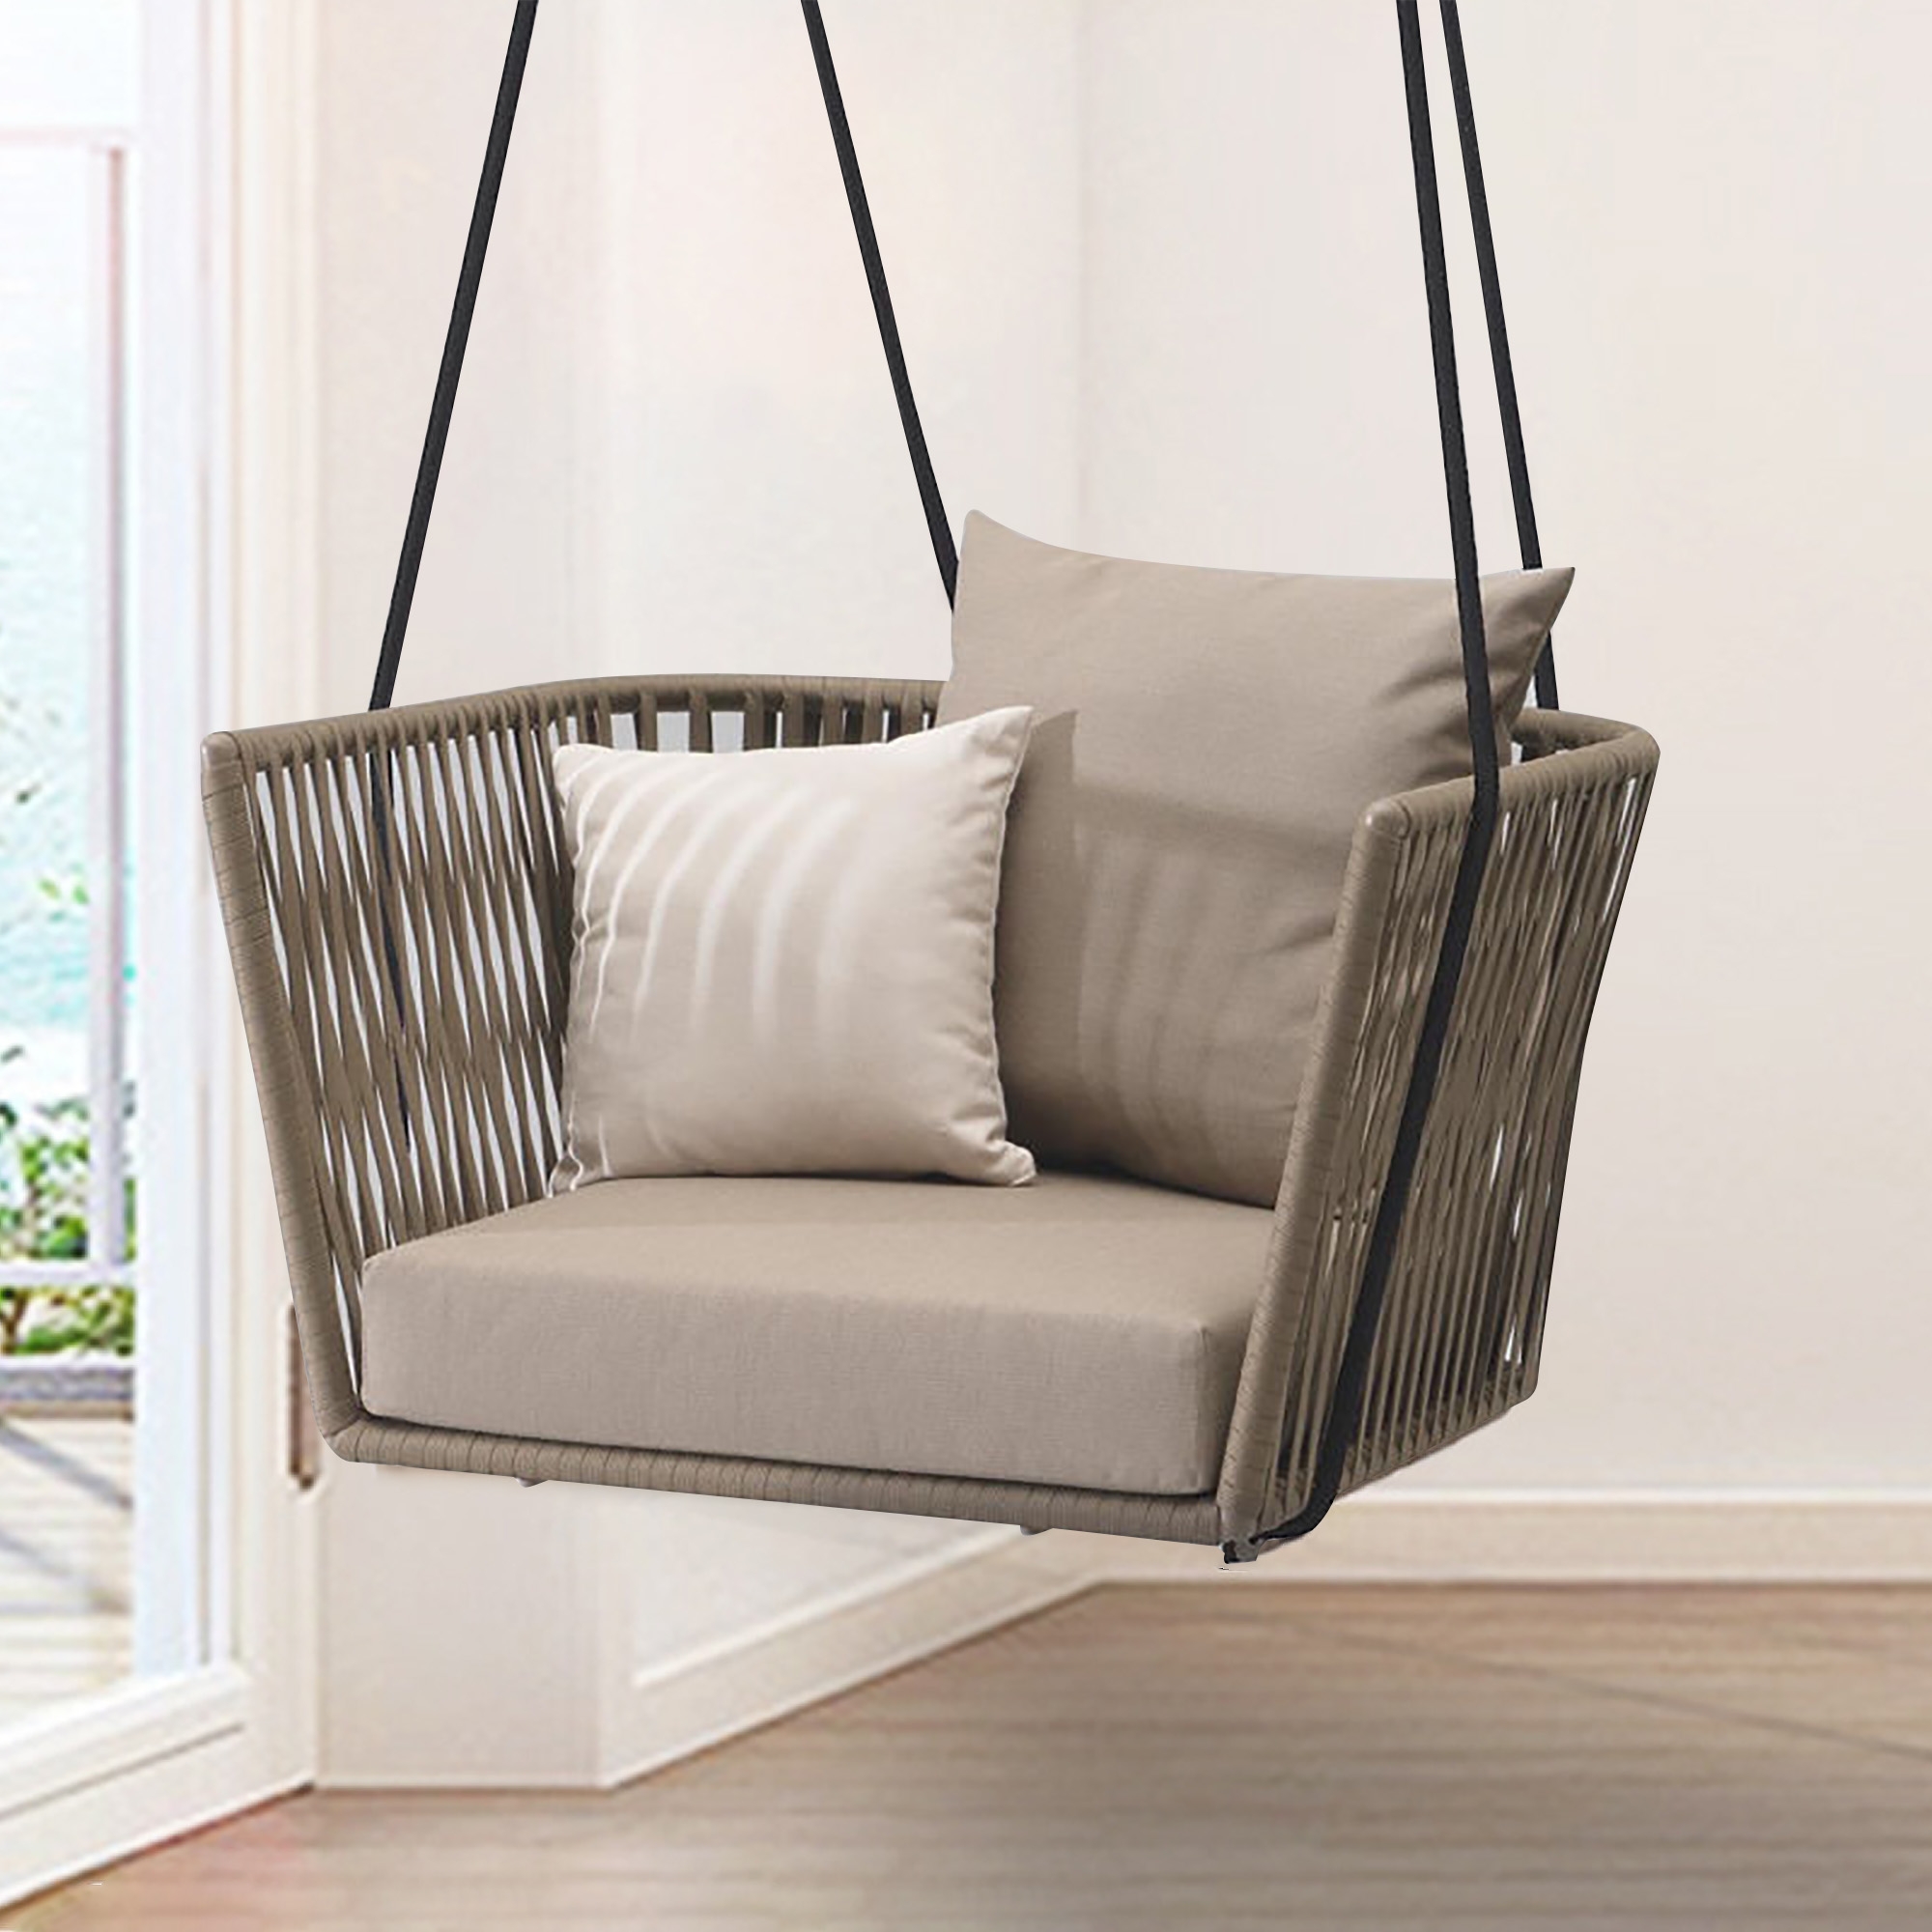 Image of Modern Outdoor Hanging Chair Rattan Porch Swing Chair with Khaki Cushion Pillow